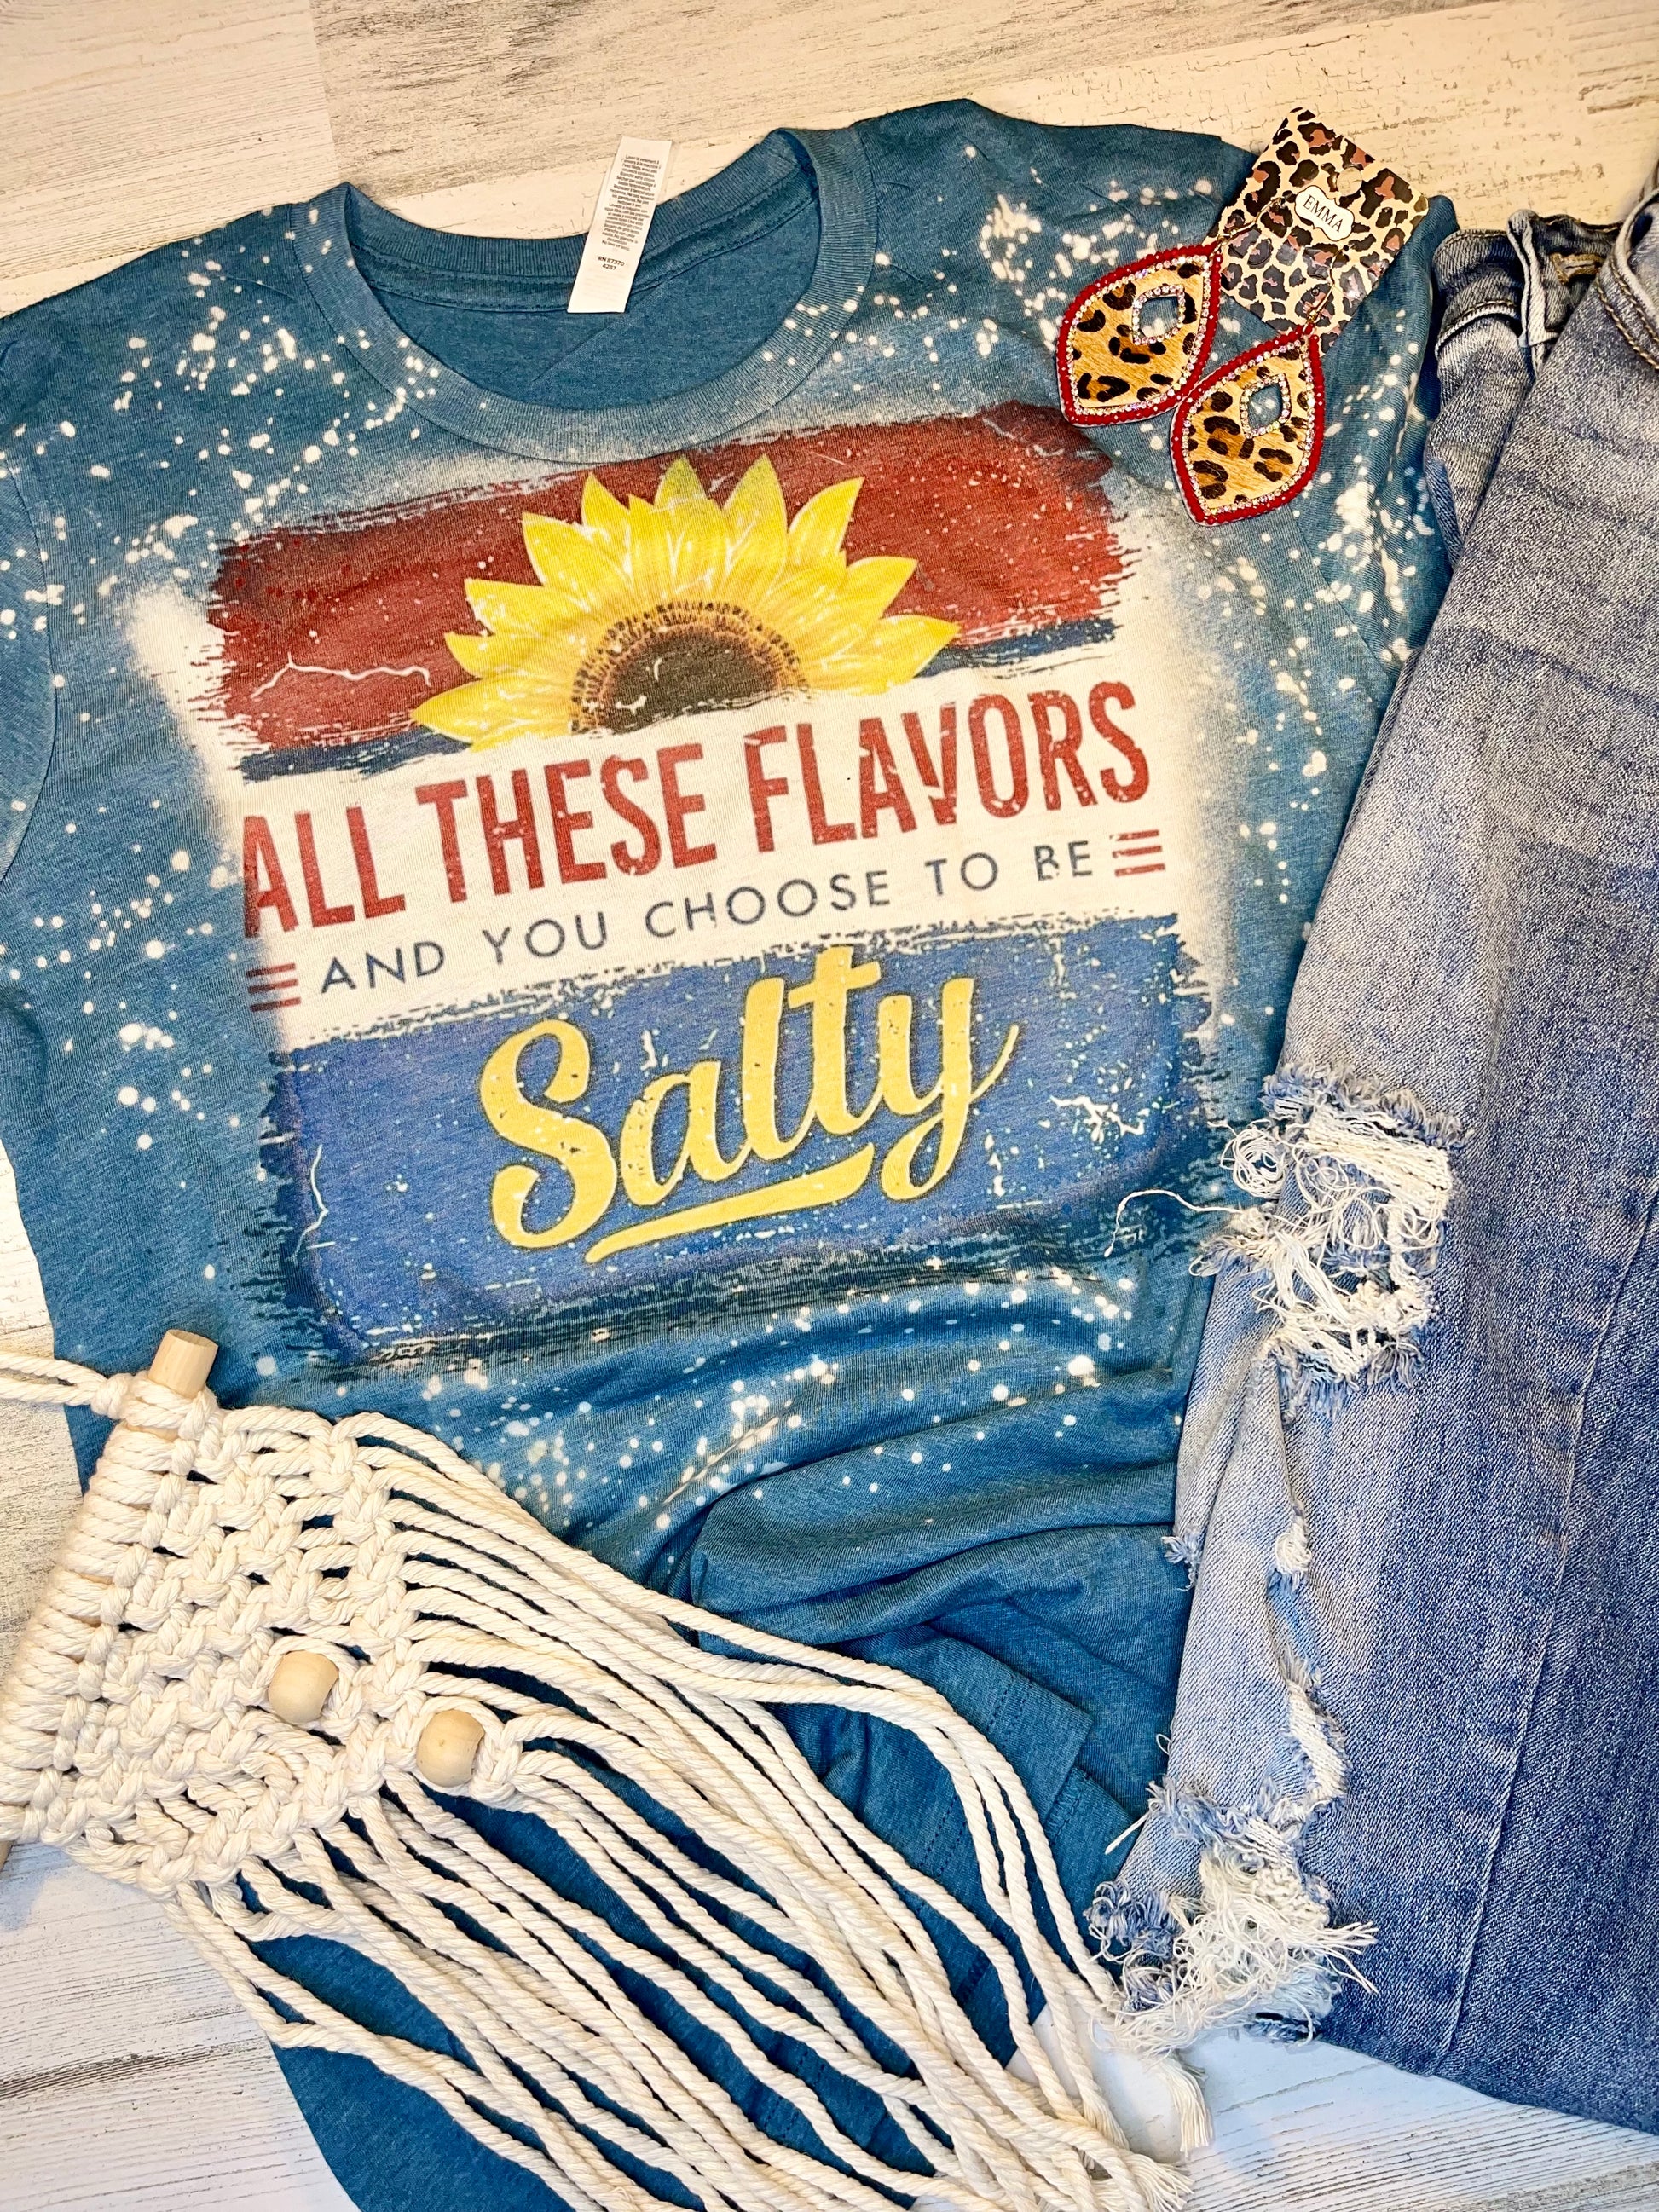 Product details Custom sublimated tee that reads "All These Flavors and You Choose To Be Salty" Pressed on a Bella Canva shirt Short sleeve  Fits true to size Contact us about a custom color shirt.   *Colors may vary slightly due to monitor resolution and lighting* Southern Bliss Boutique